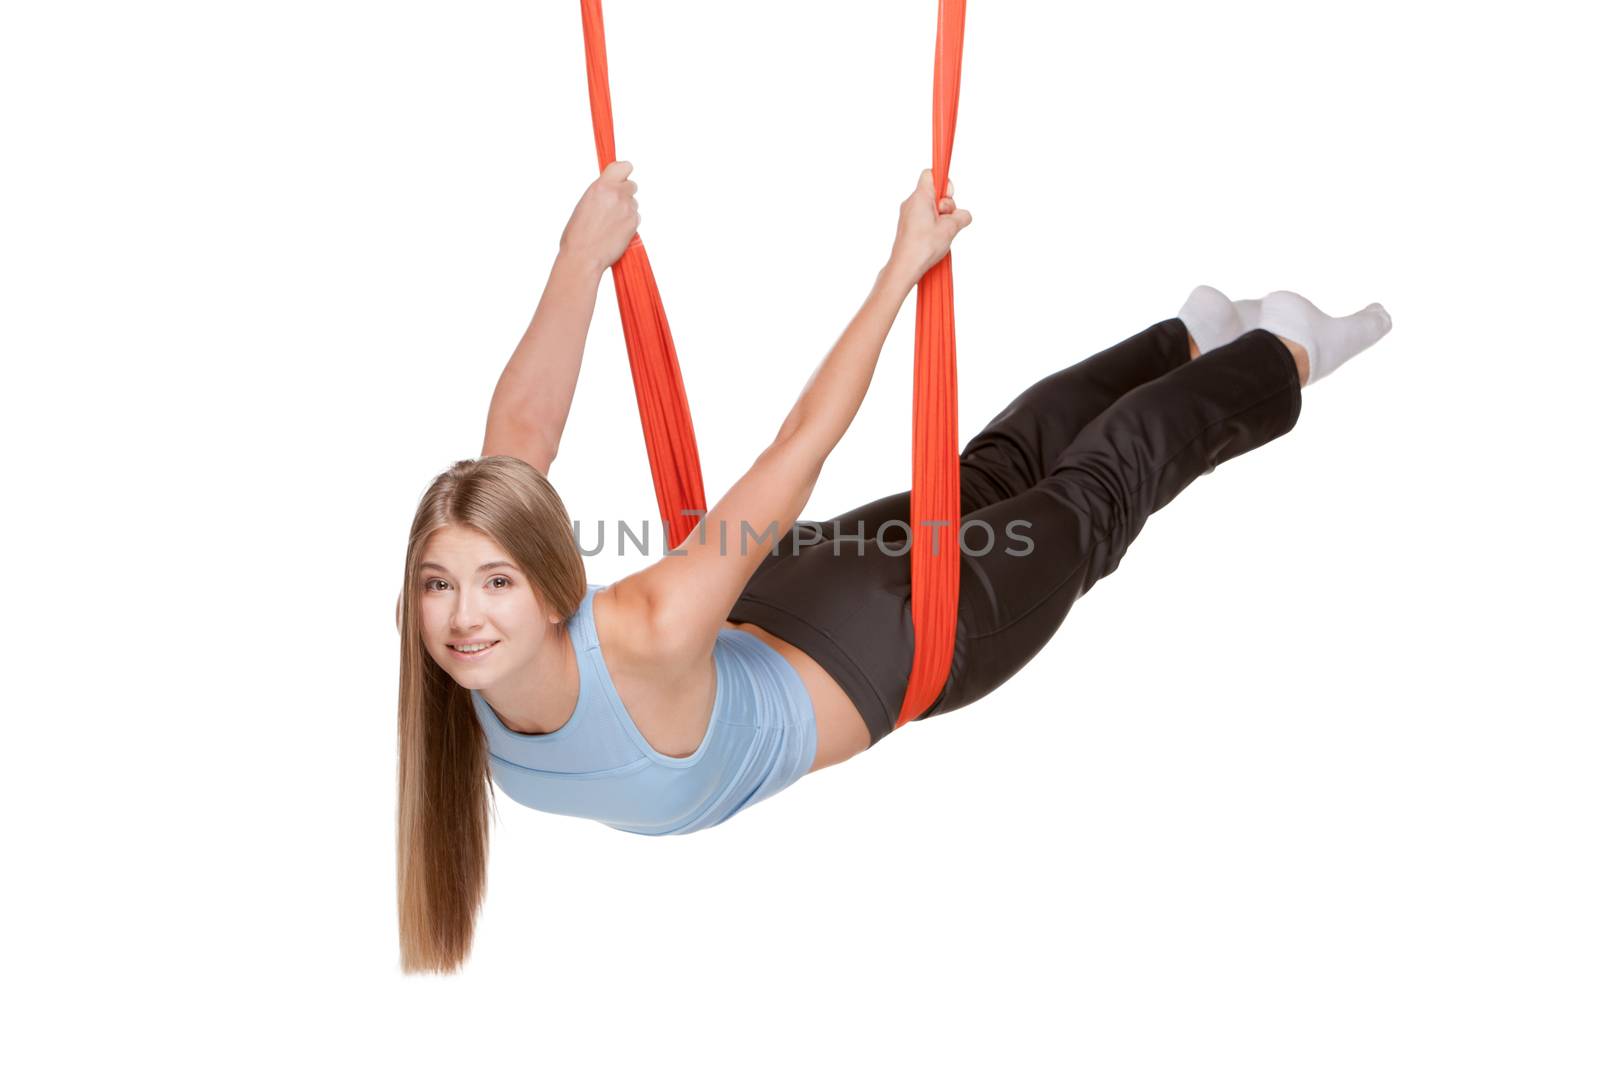 Young woman doing anti-gravity aerial yoga in red hammock on a seamless white background.